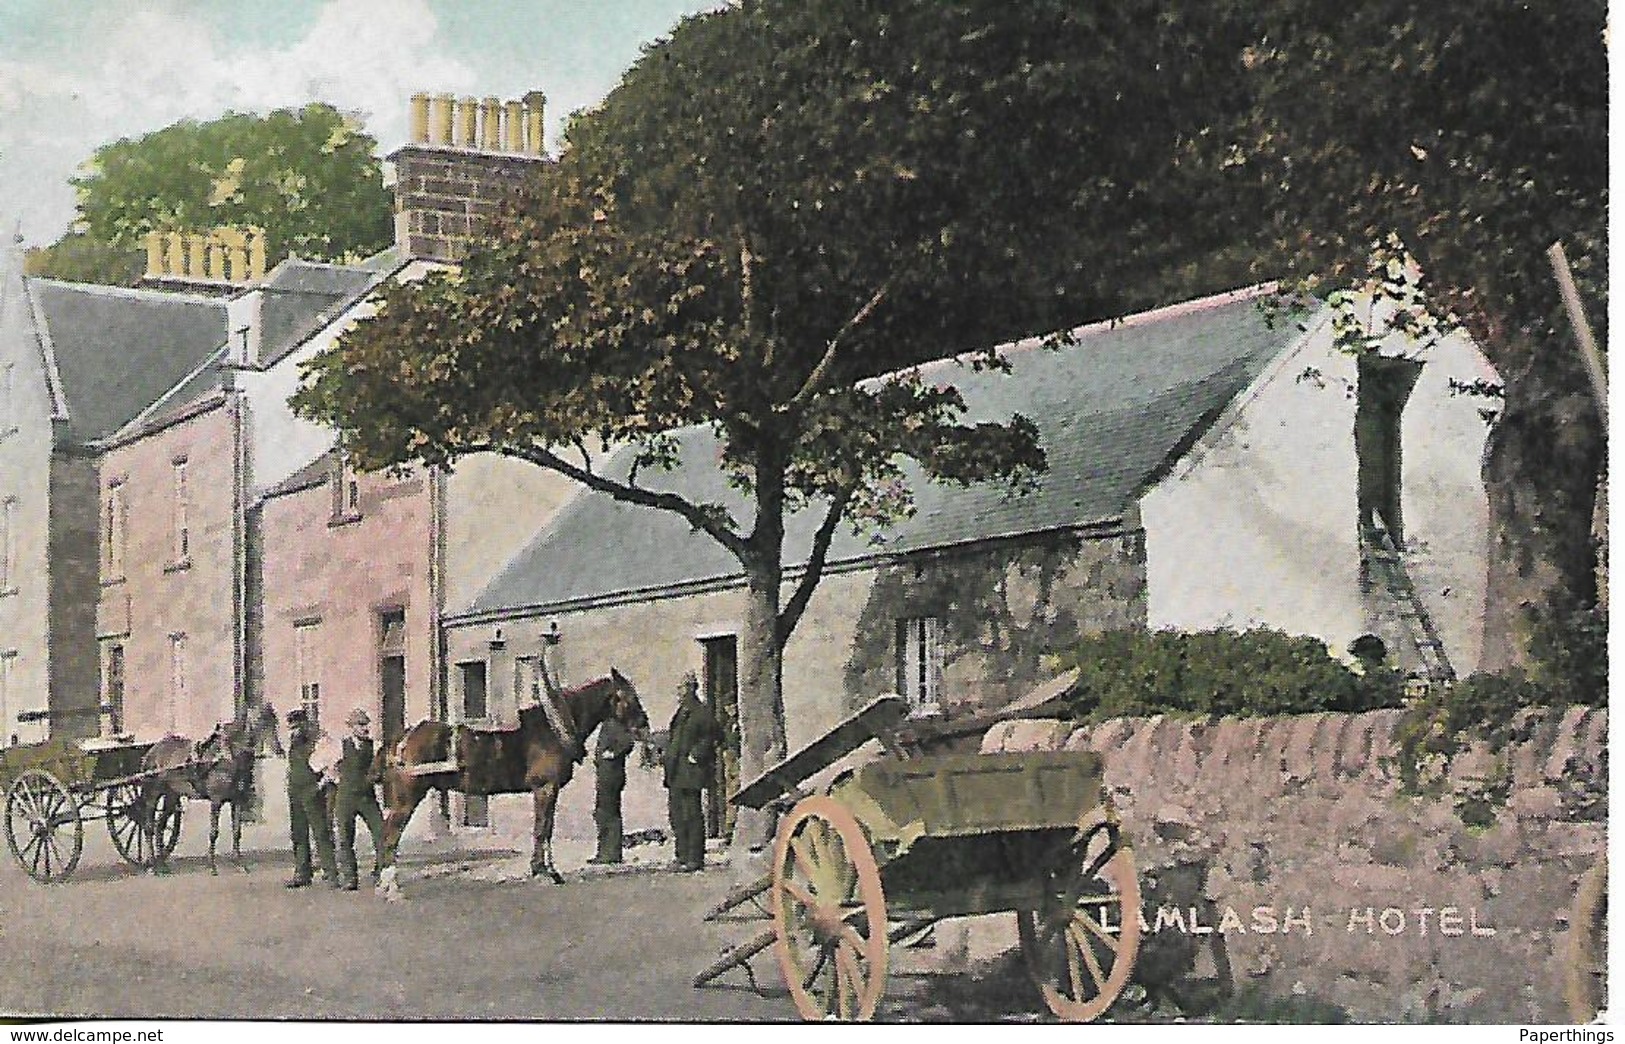 Old Colour Postcard, Scotland, Isle Of Arran, Firth Of Clyde, Lamlash Hotel, Horse And Cart, Street, Houses, People. - Bute